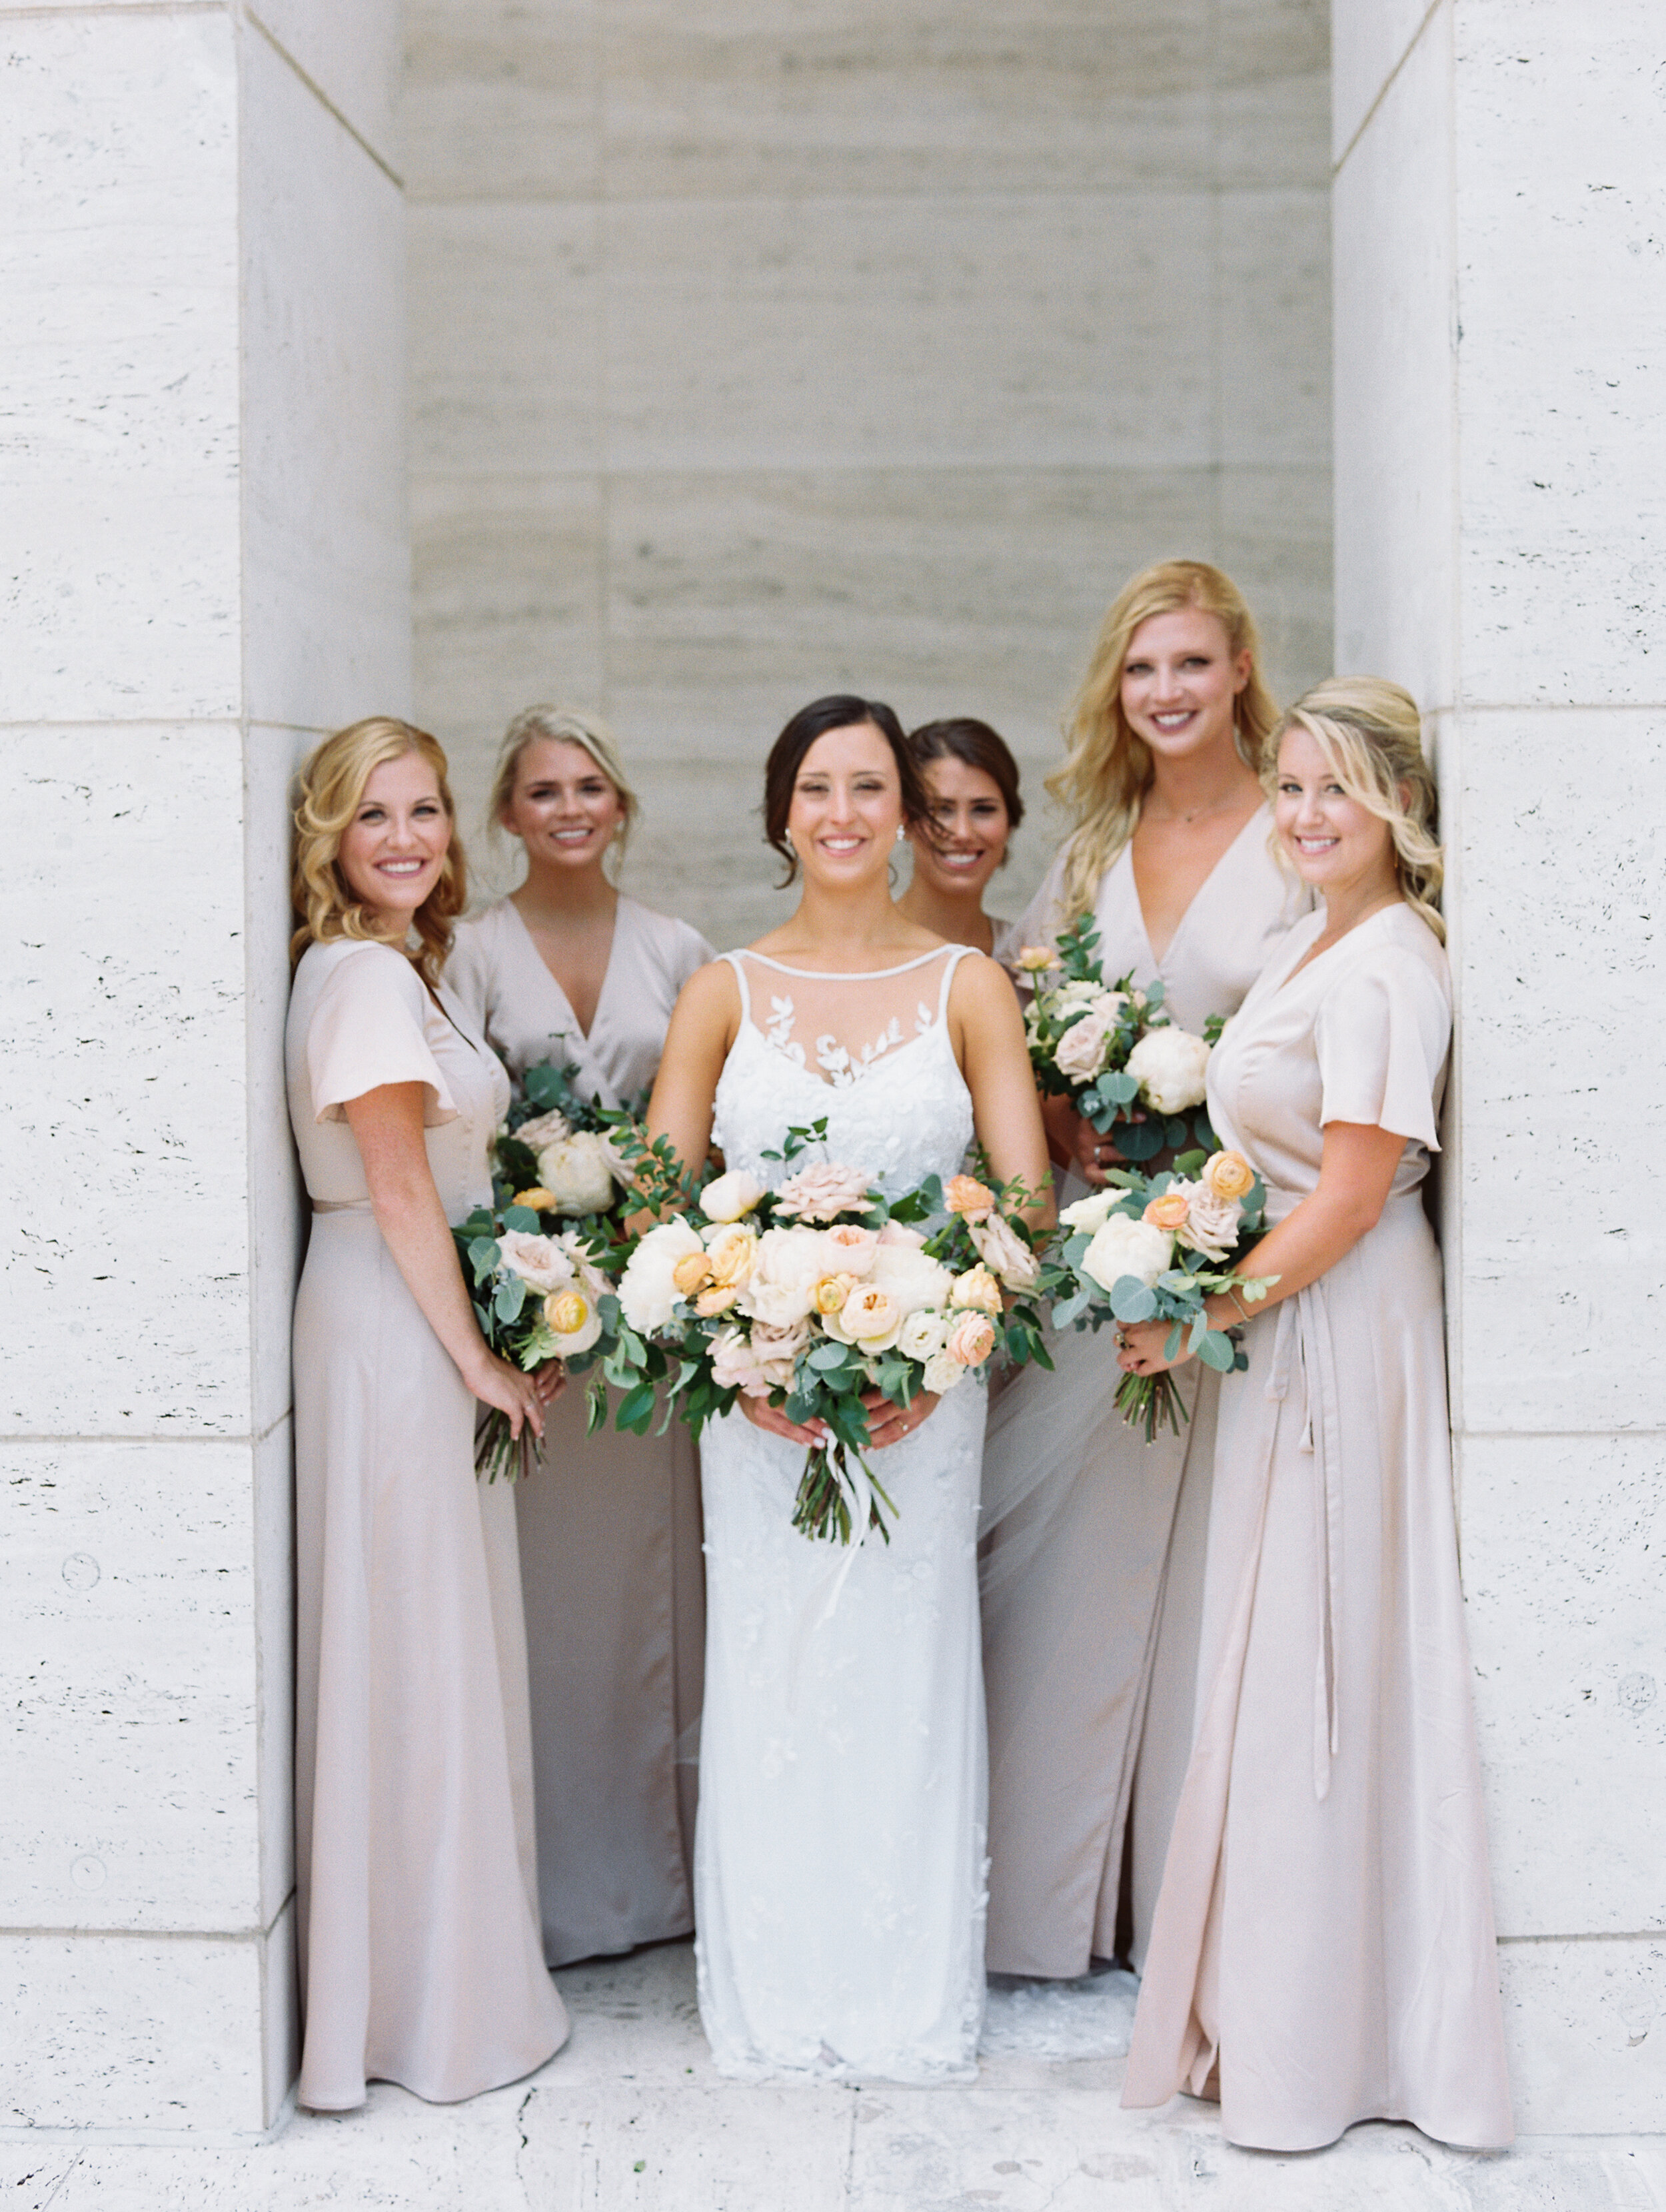 Bridal party portraits at Tennessee Tower in downtown Nashville. Asymmterical, whimsical bouquets with garden roses, ranunculus, and greenery.